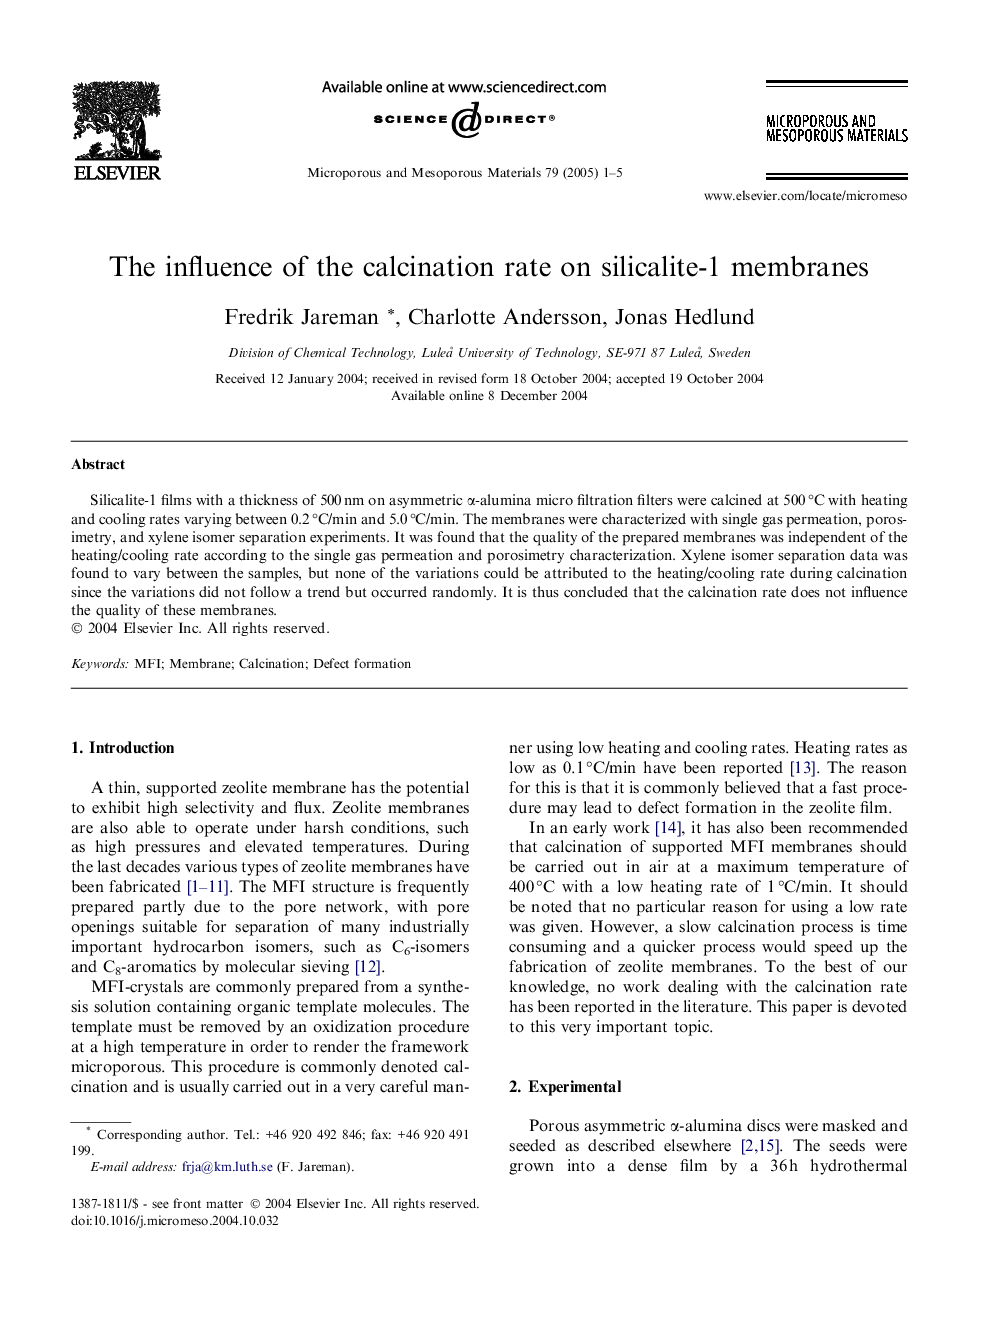 The influence of the calcination rate on silicalite-1 membranes